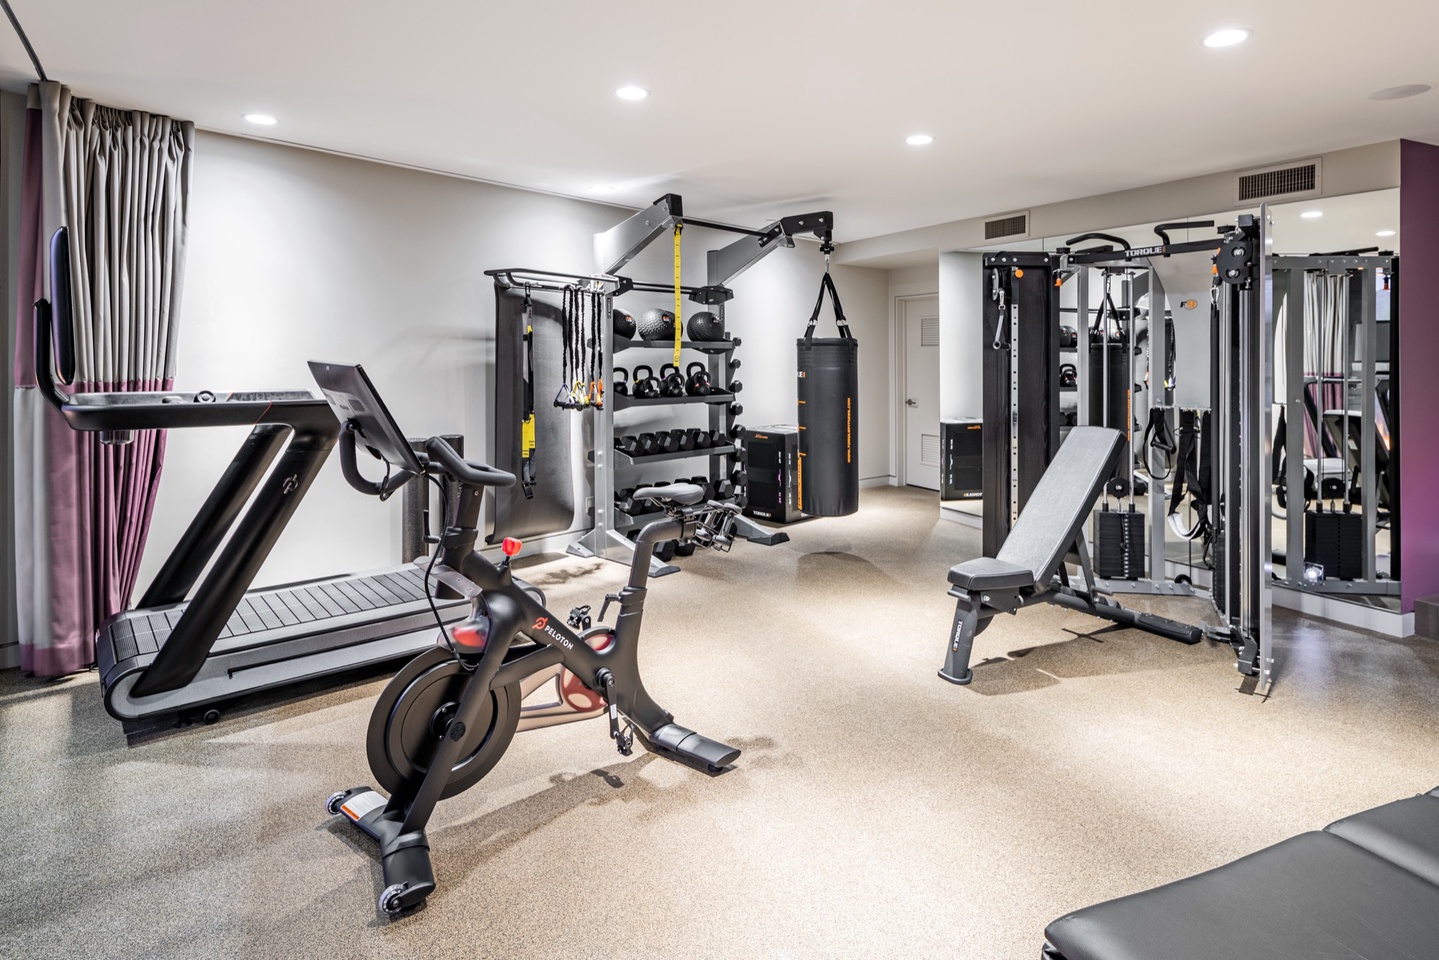 Spacious gym area w/ dumbbells, pulley, and more